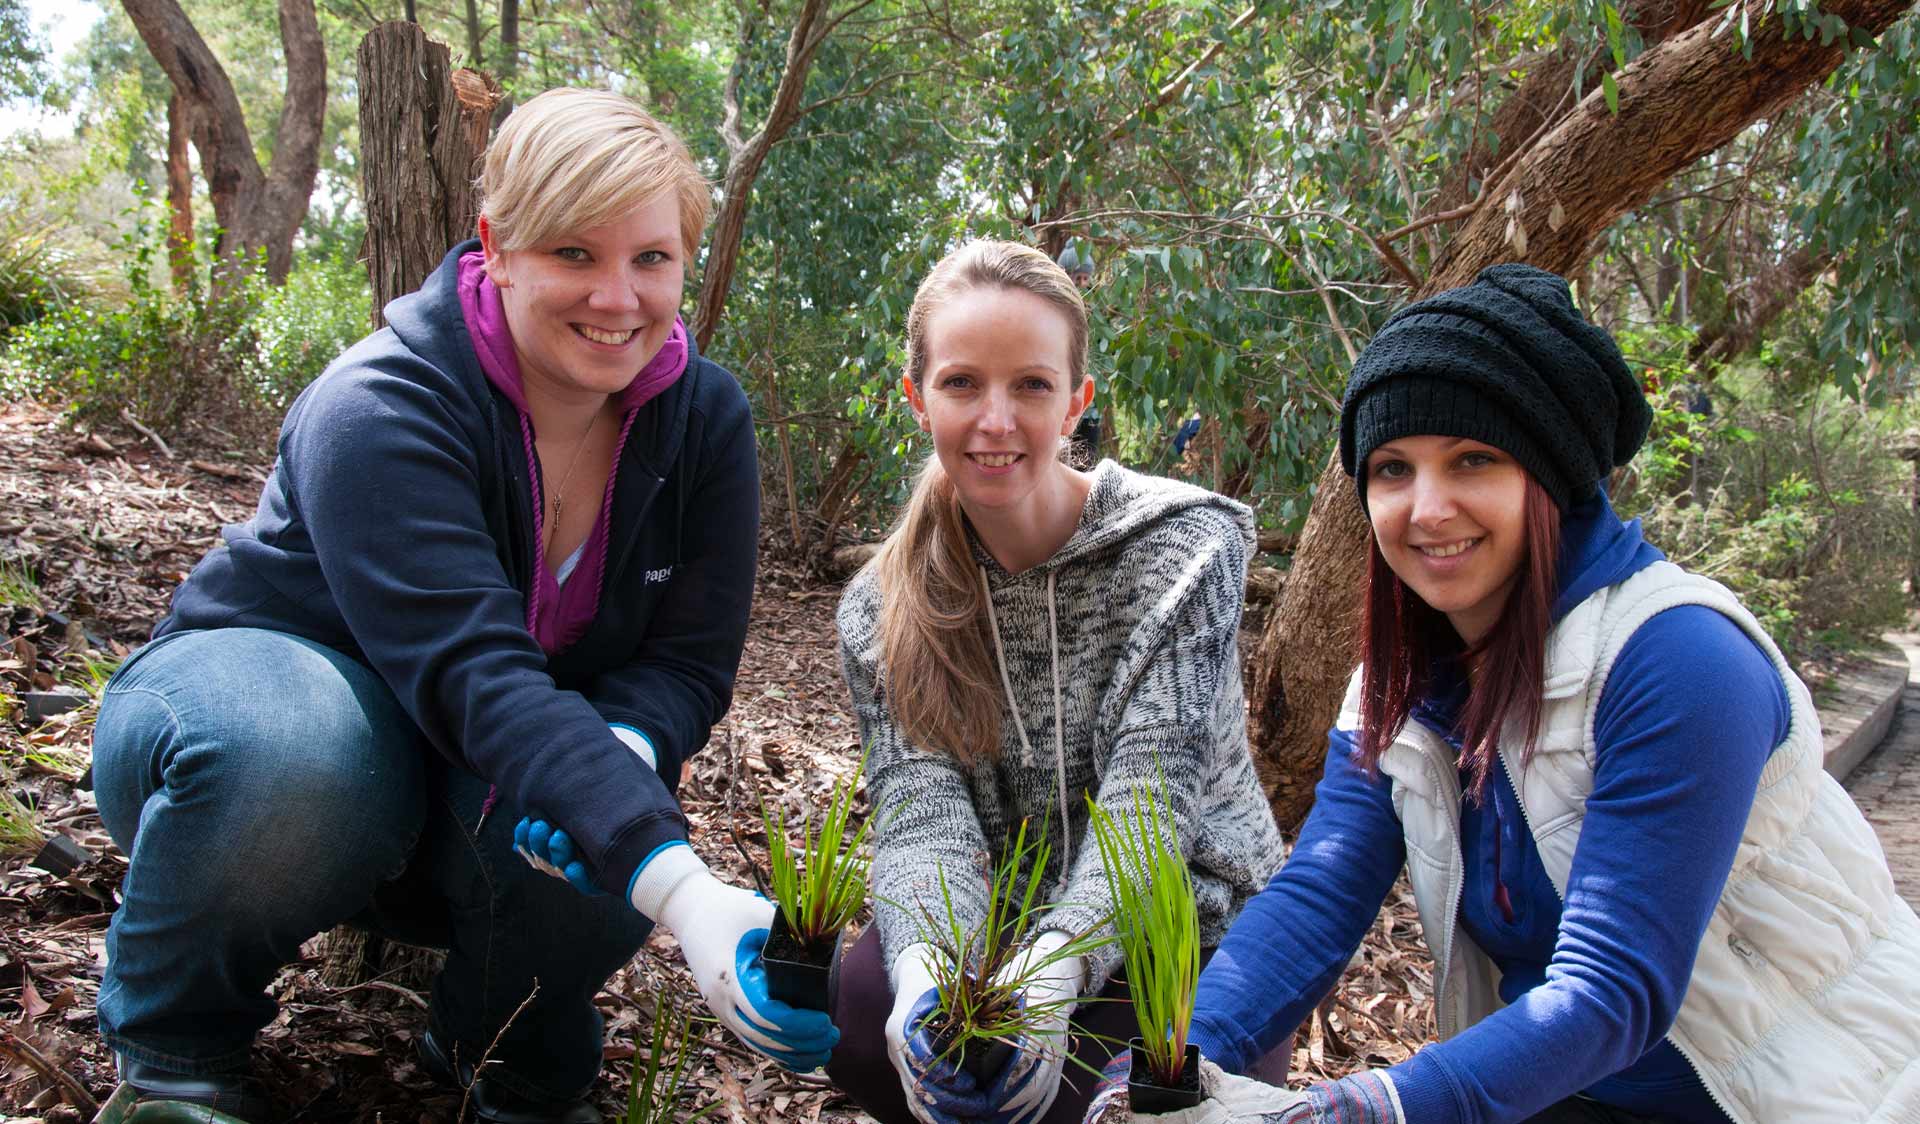 Three women in casual clothing holding seedlings